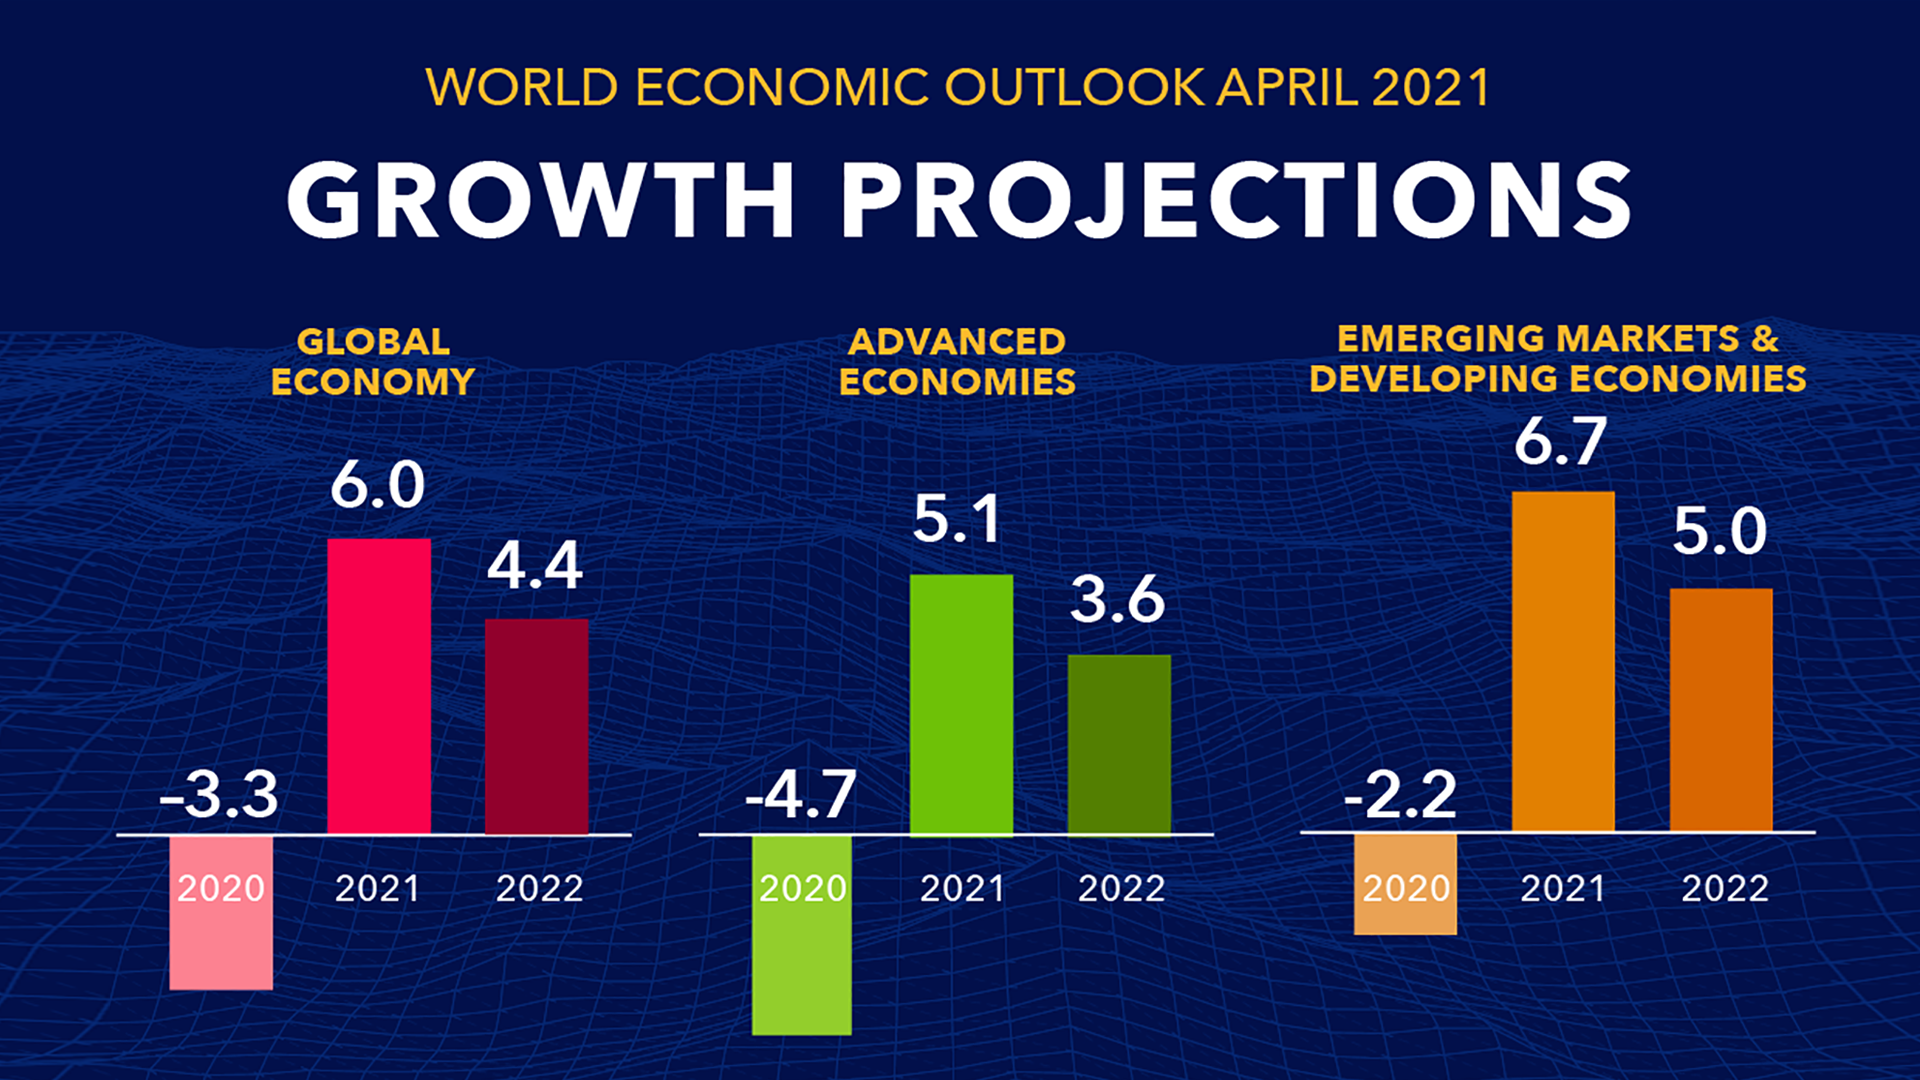 April 2021 World Economic Outlook, Growth Projections (Global, Advanced Economies, Emerging Markets & Developing Economies)